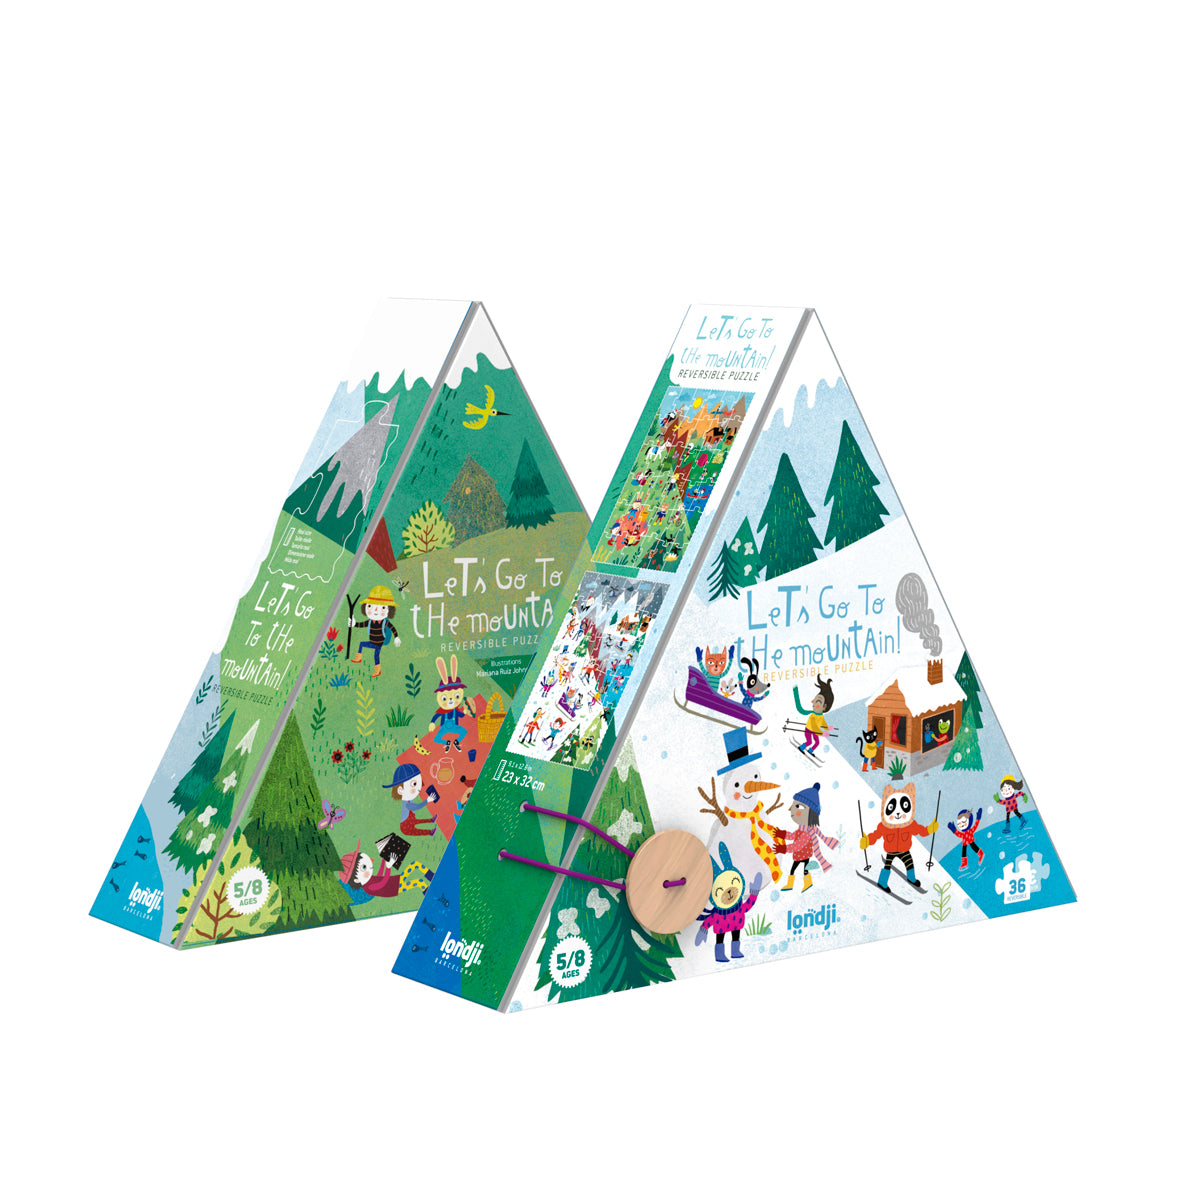 Londji Lets go to the mountain reversible puzzle